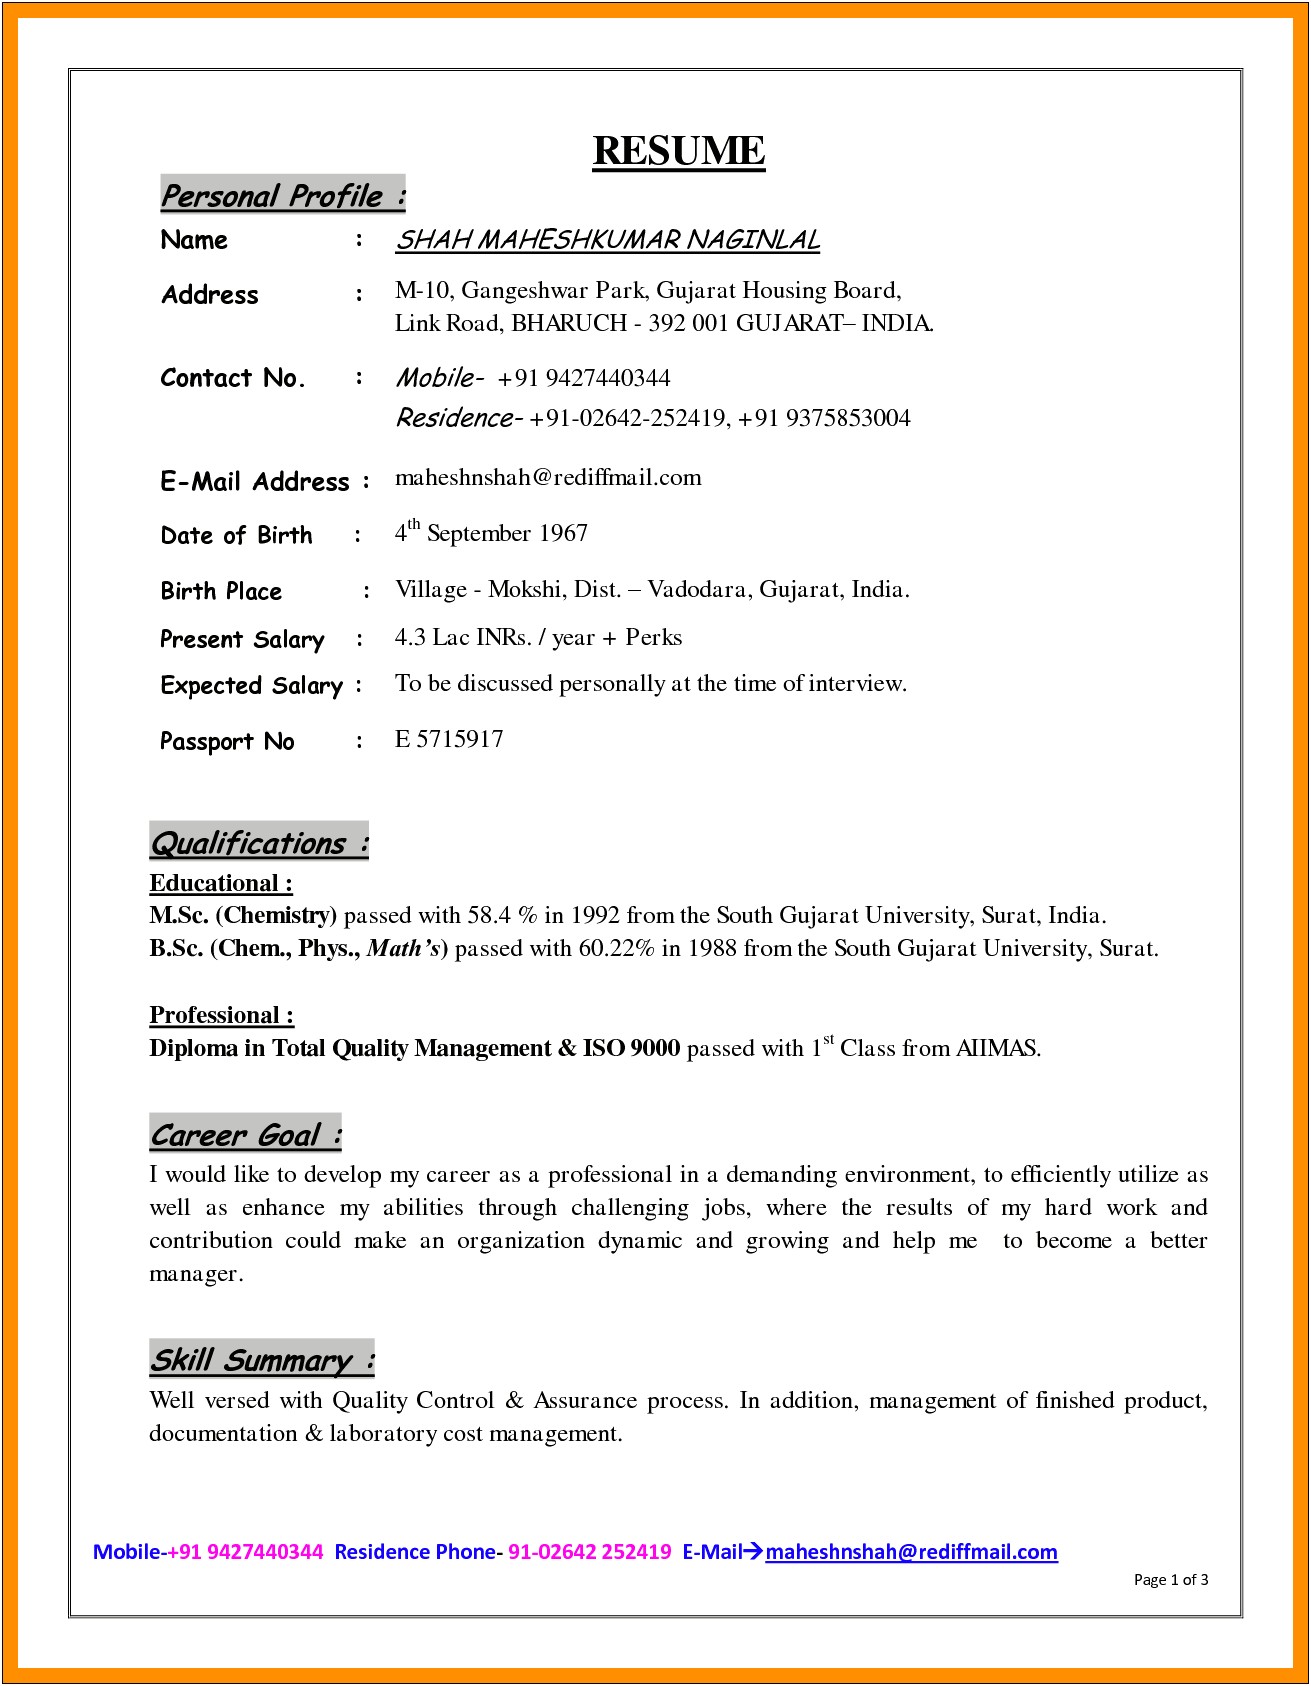 Resume With Personal Details Sample